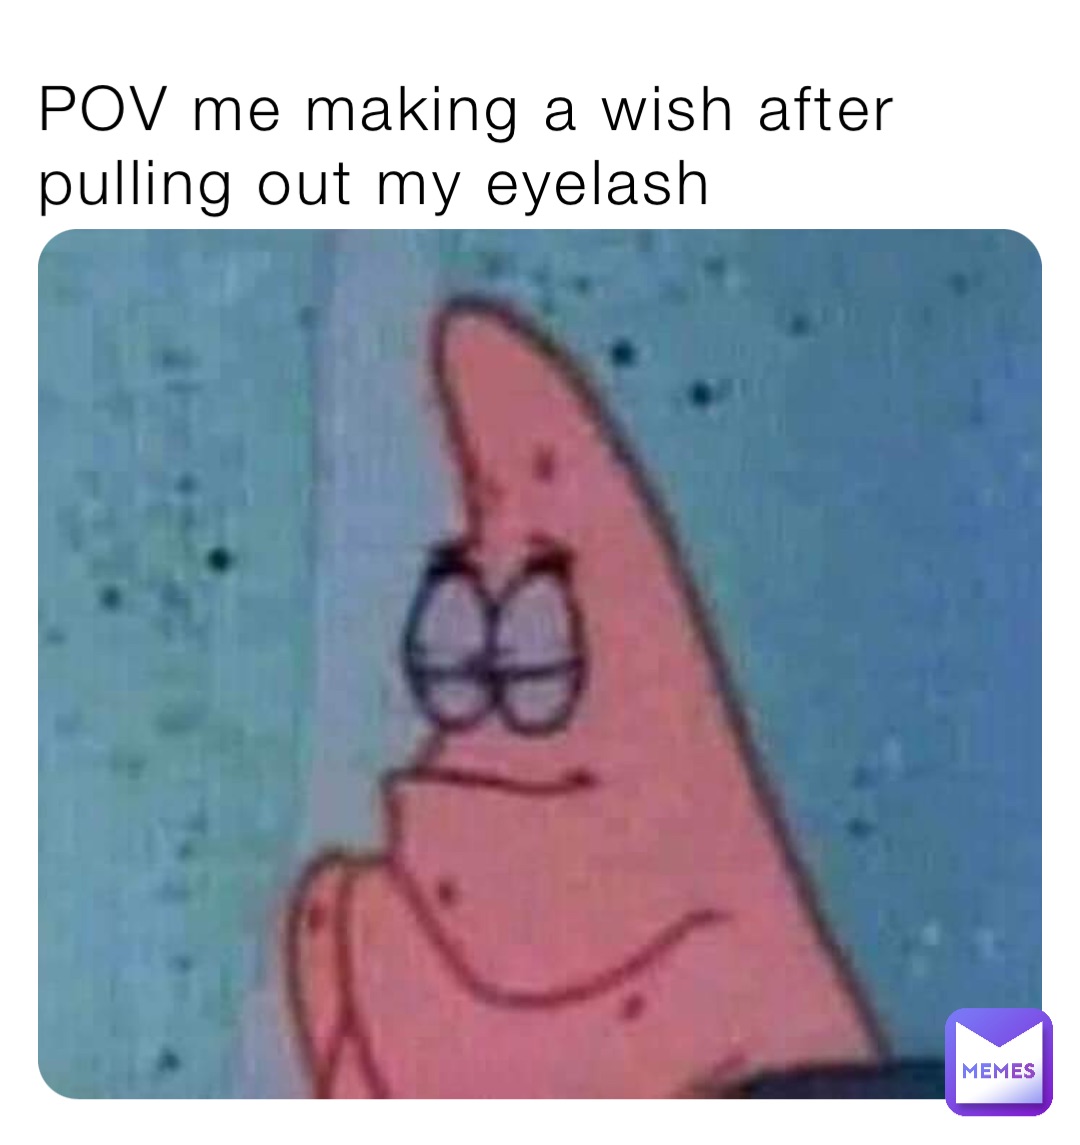 POV me making a wish after pulling out my eyelash